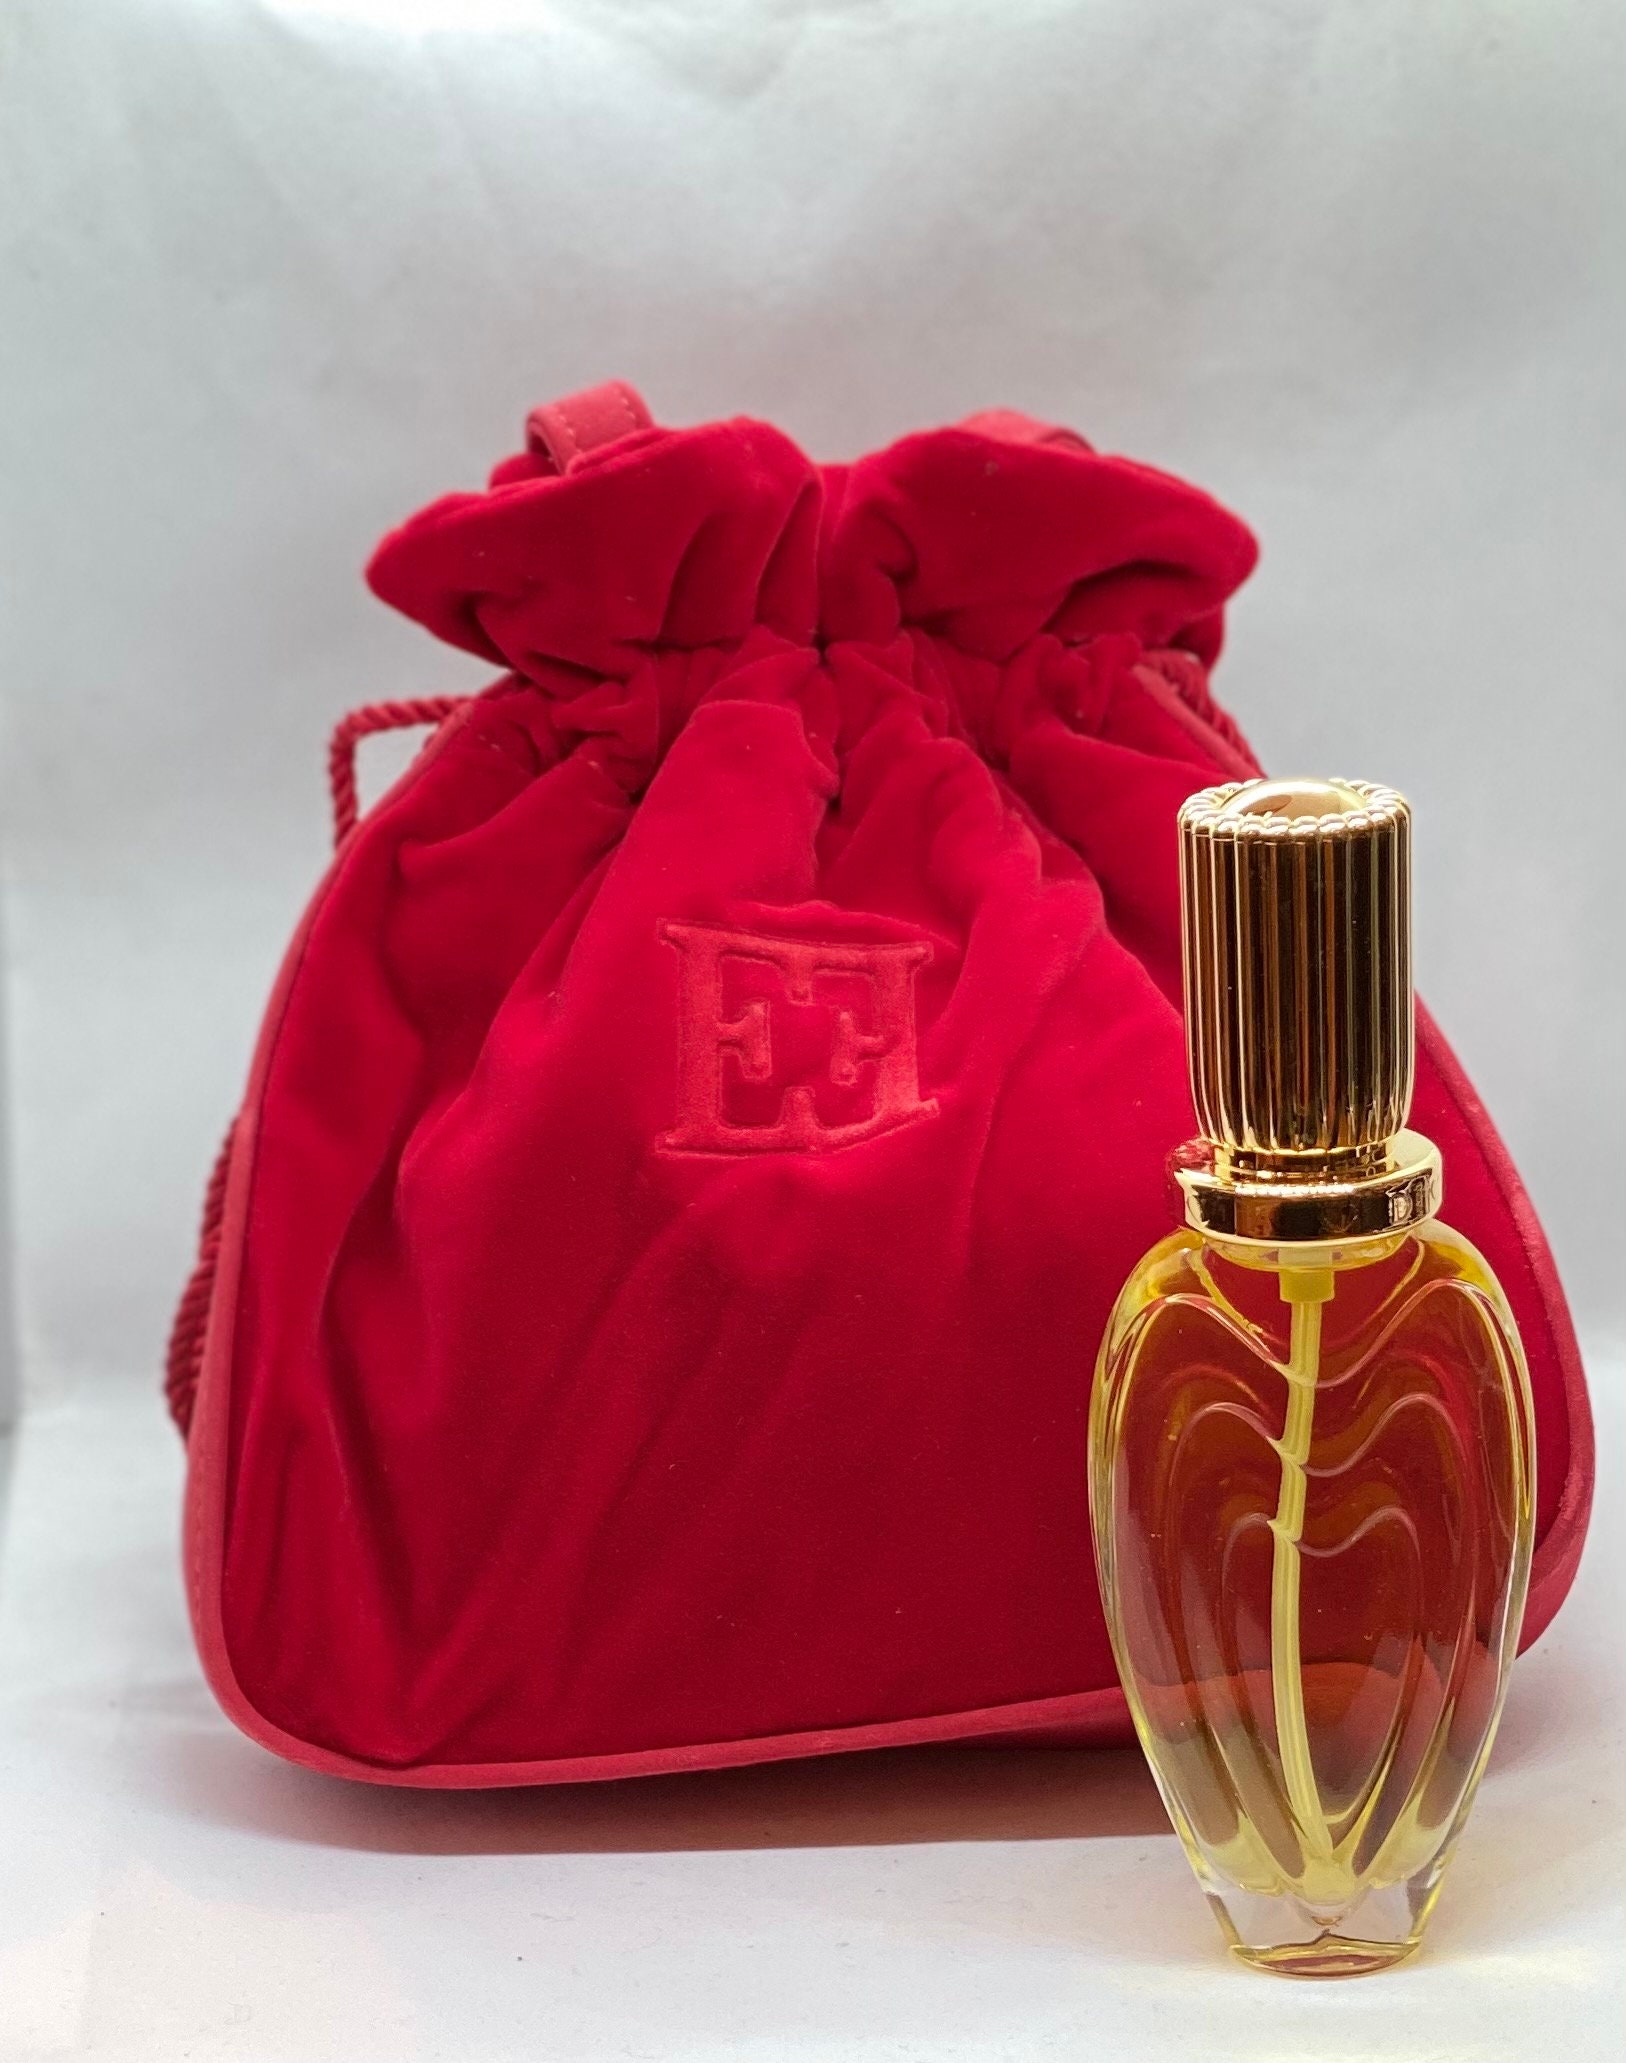 Details about   NEW ESCADA CUTE EVENING RED VELVET BAG  MARGARETHA LEY SMALL AND BEAUTIFUL NEW 